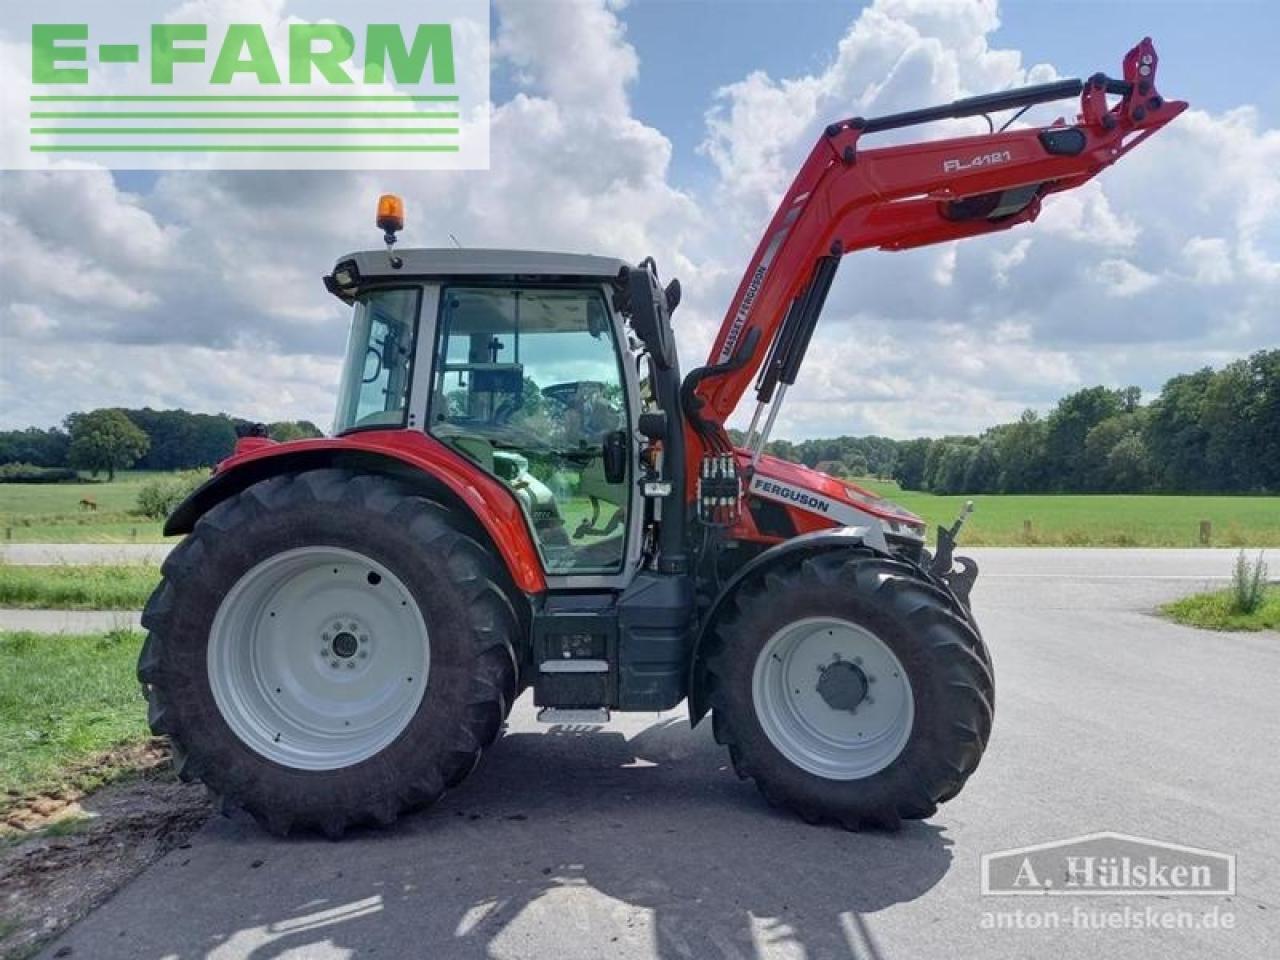 Tracteur agricole Massey Ferguson mf5s.145 dyna-6 exclusive mit frontlader, fkh, fzw: photos 4